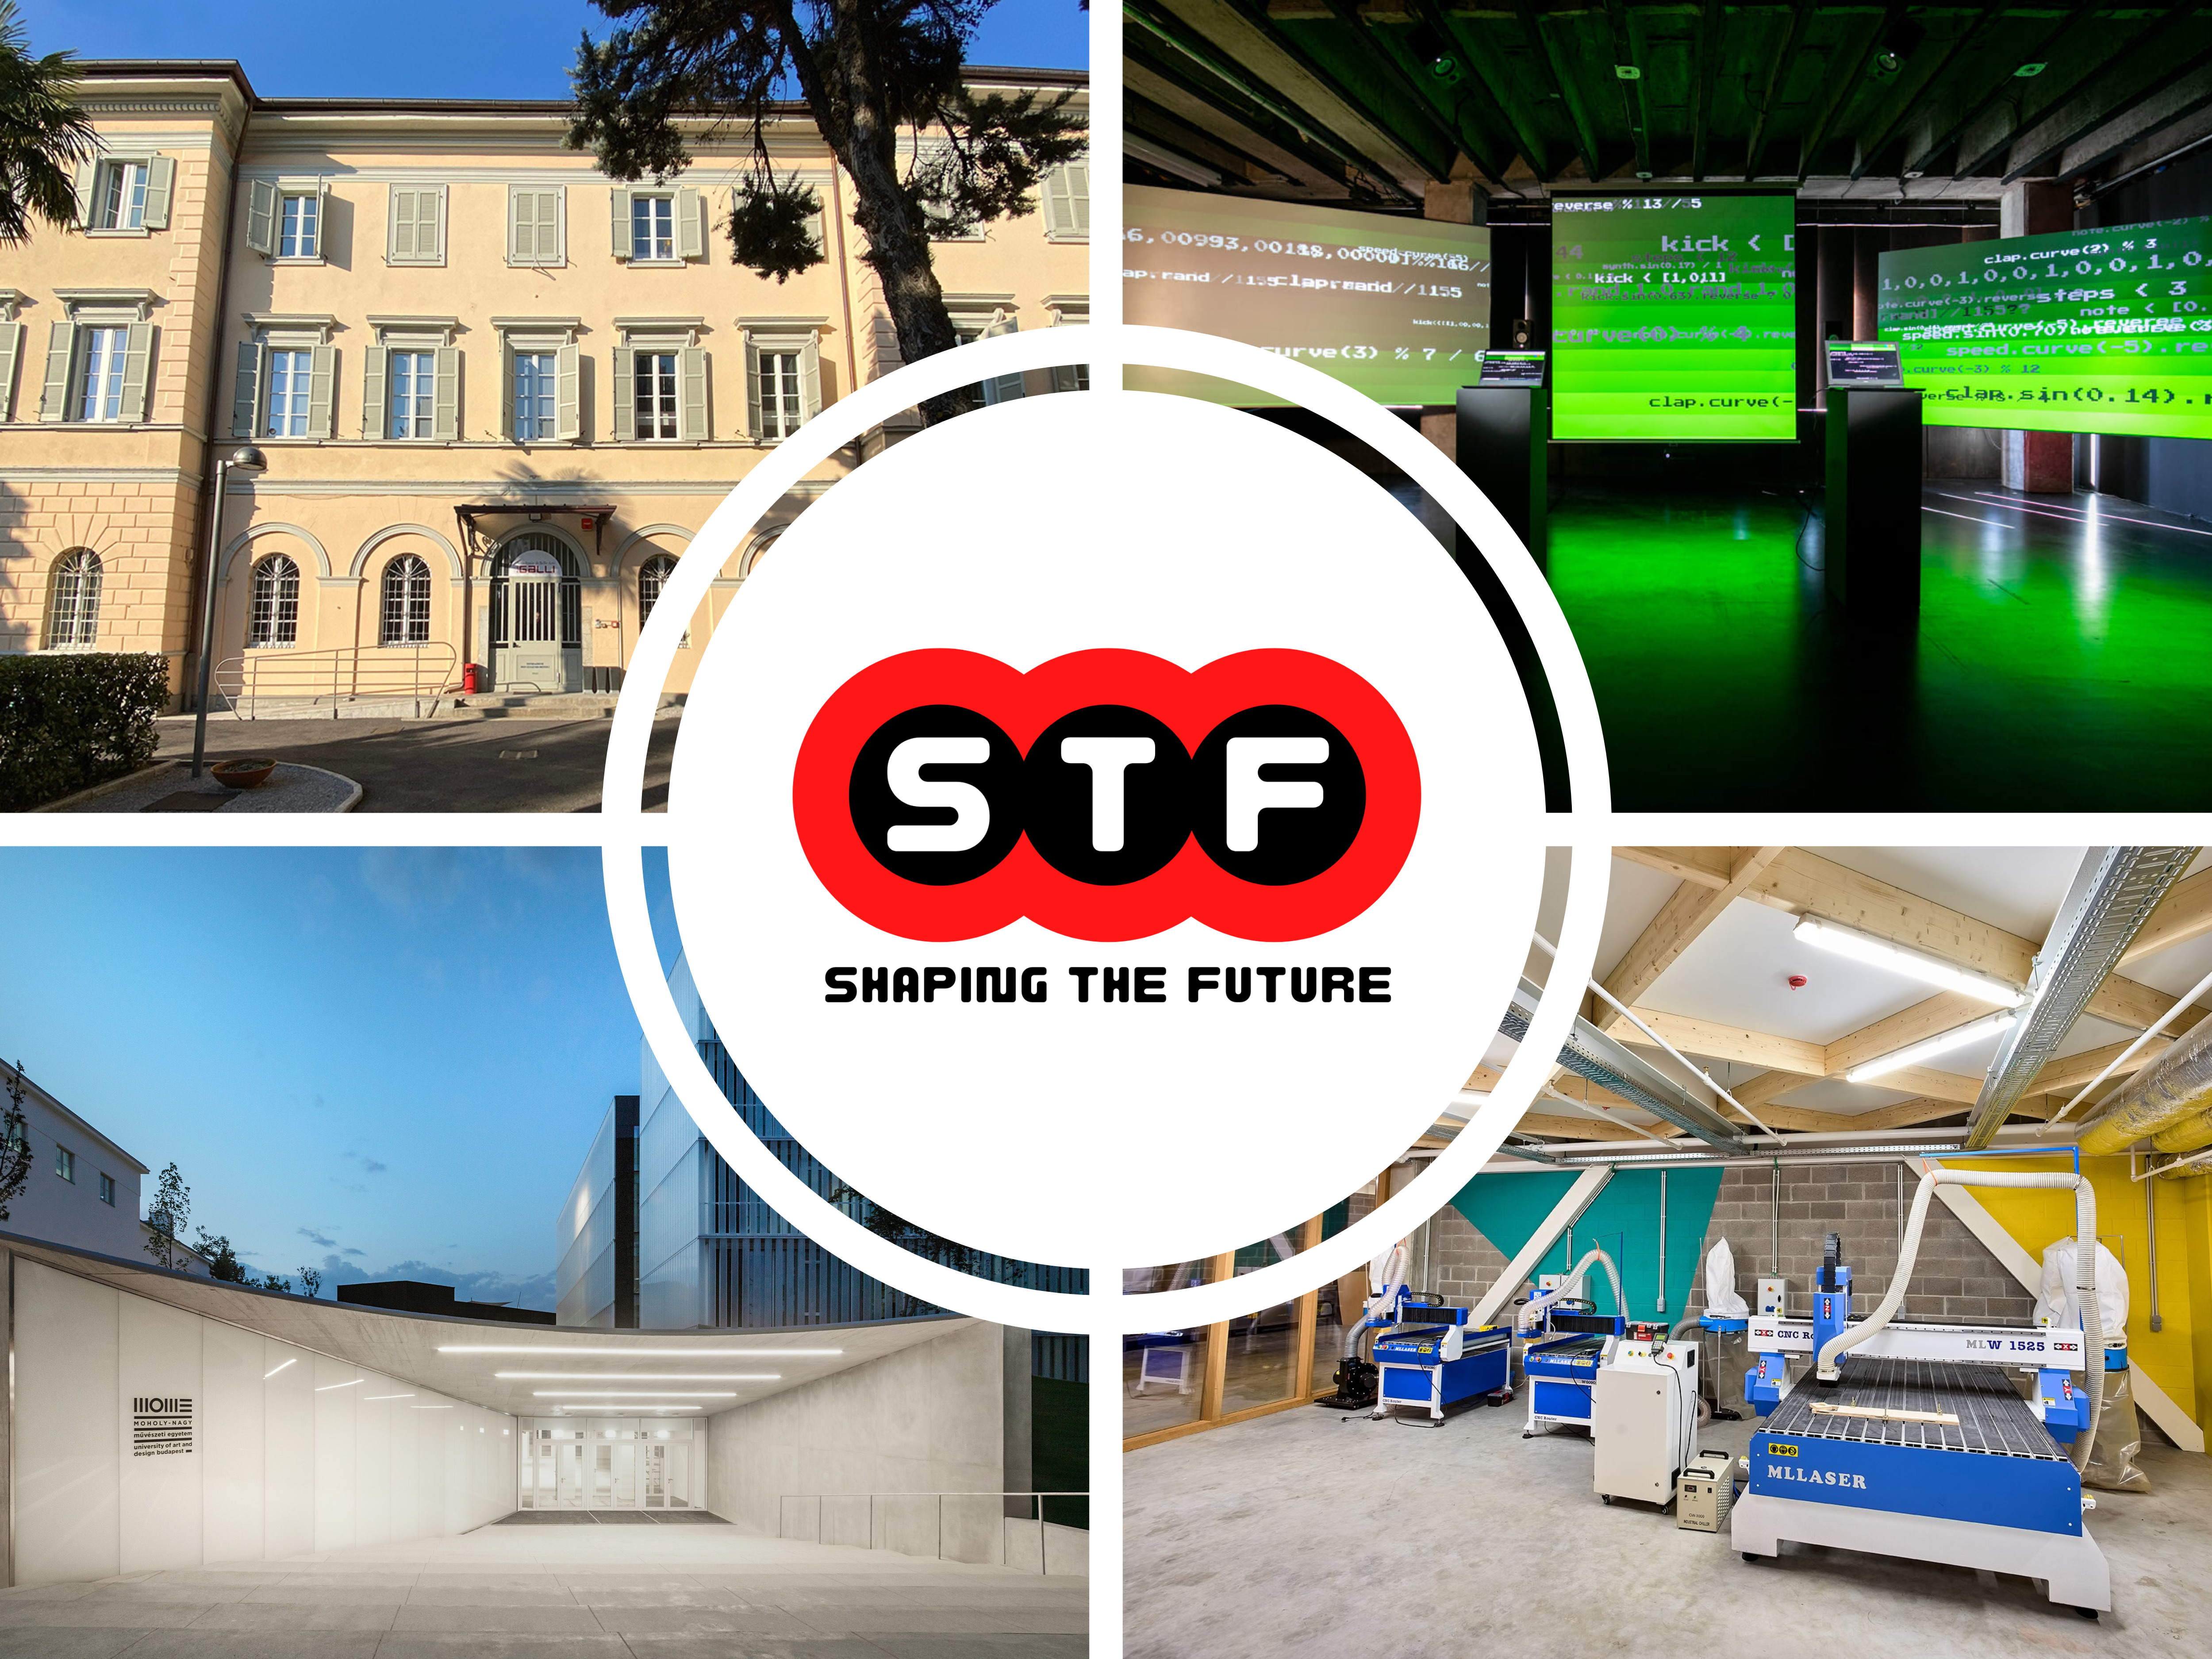 Pictures of the 4 project partners spaces, with the STF logo in the middle